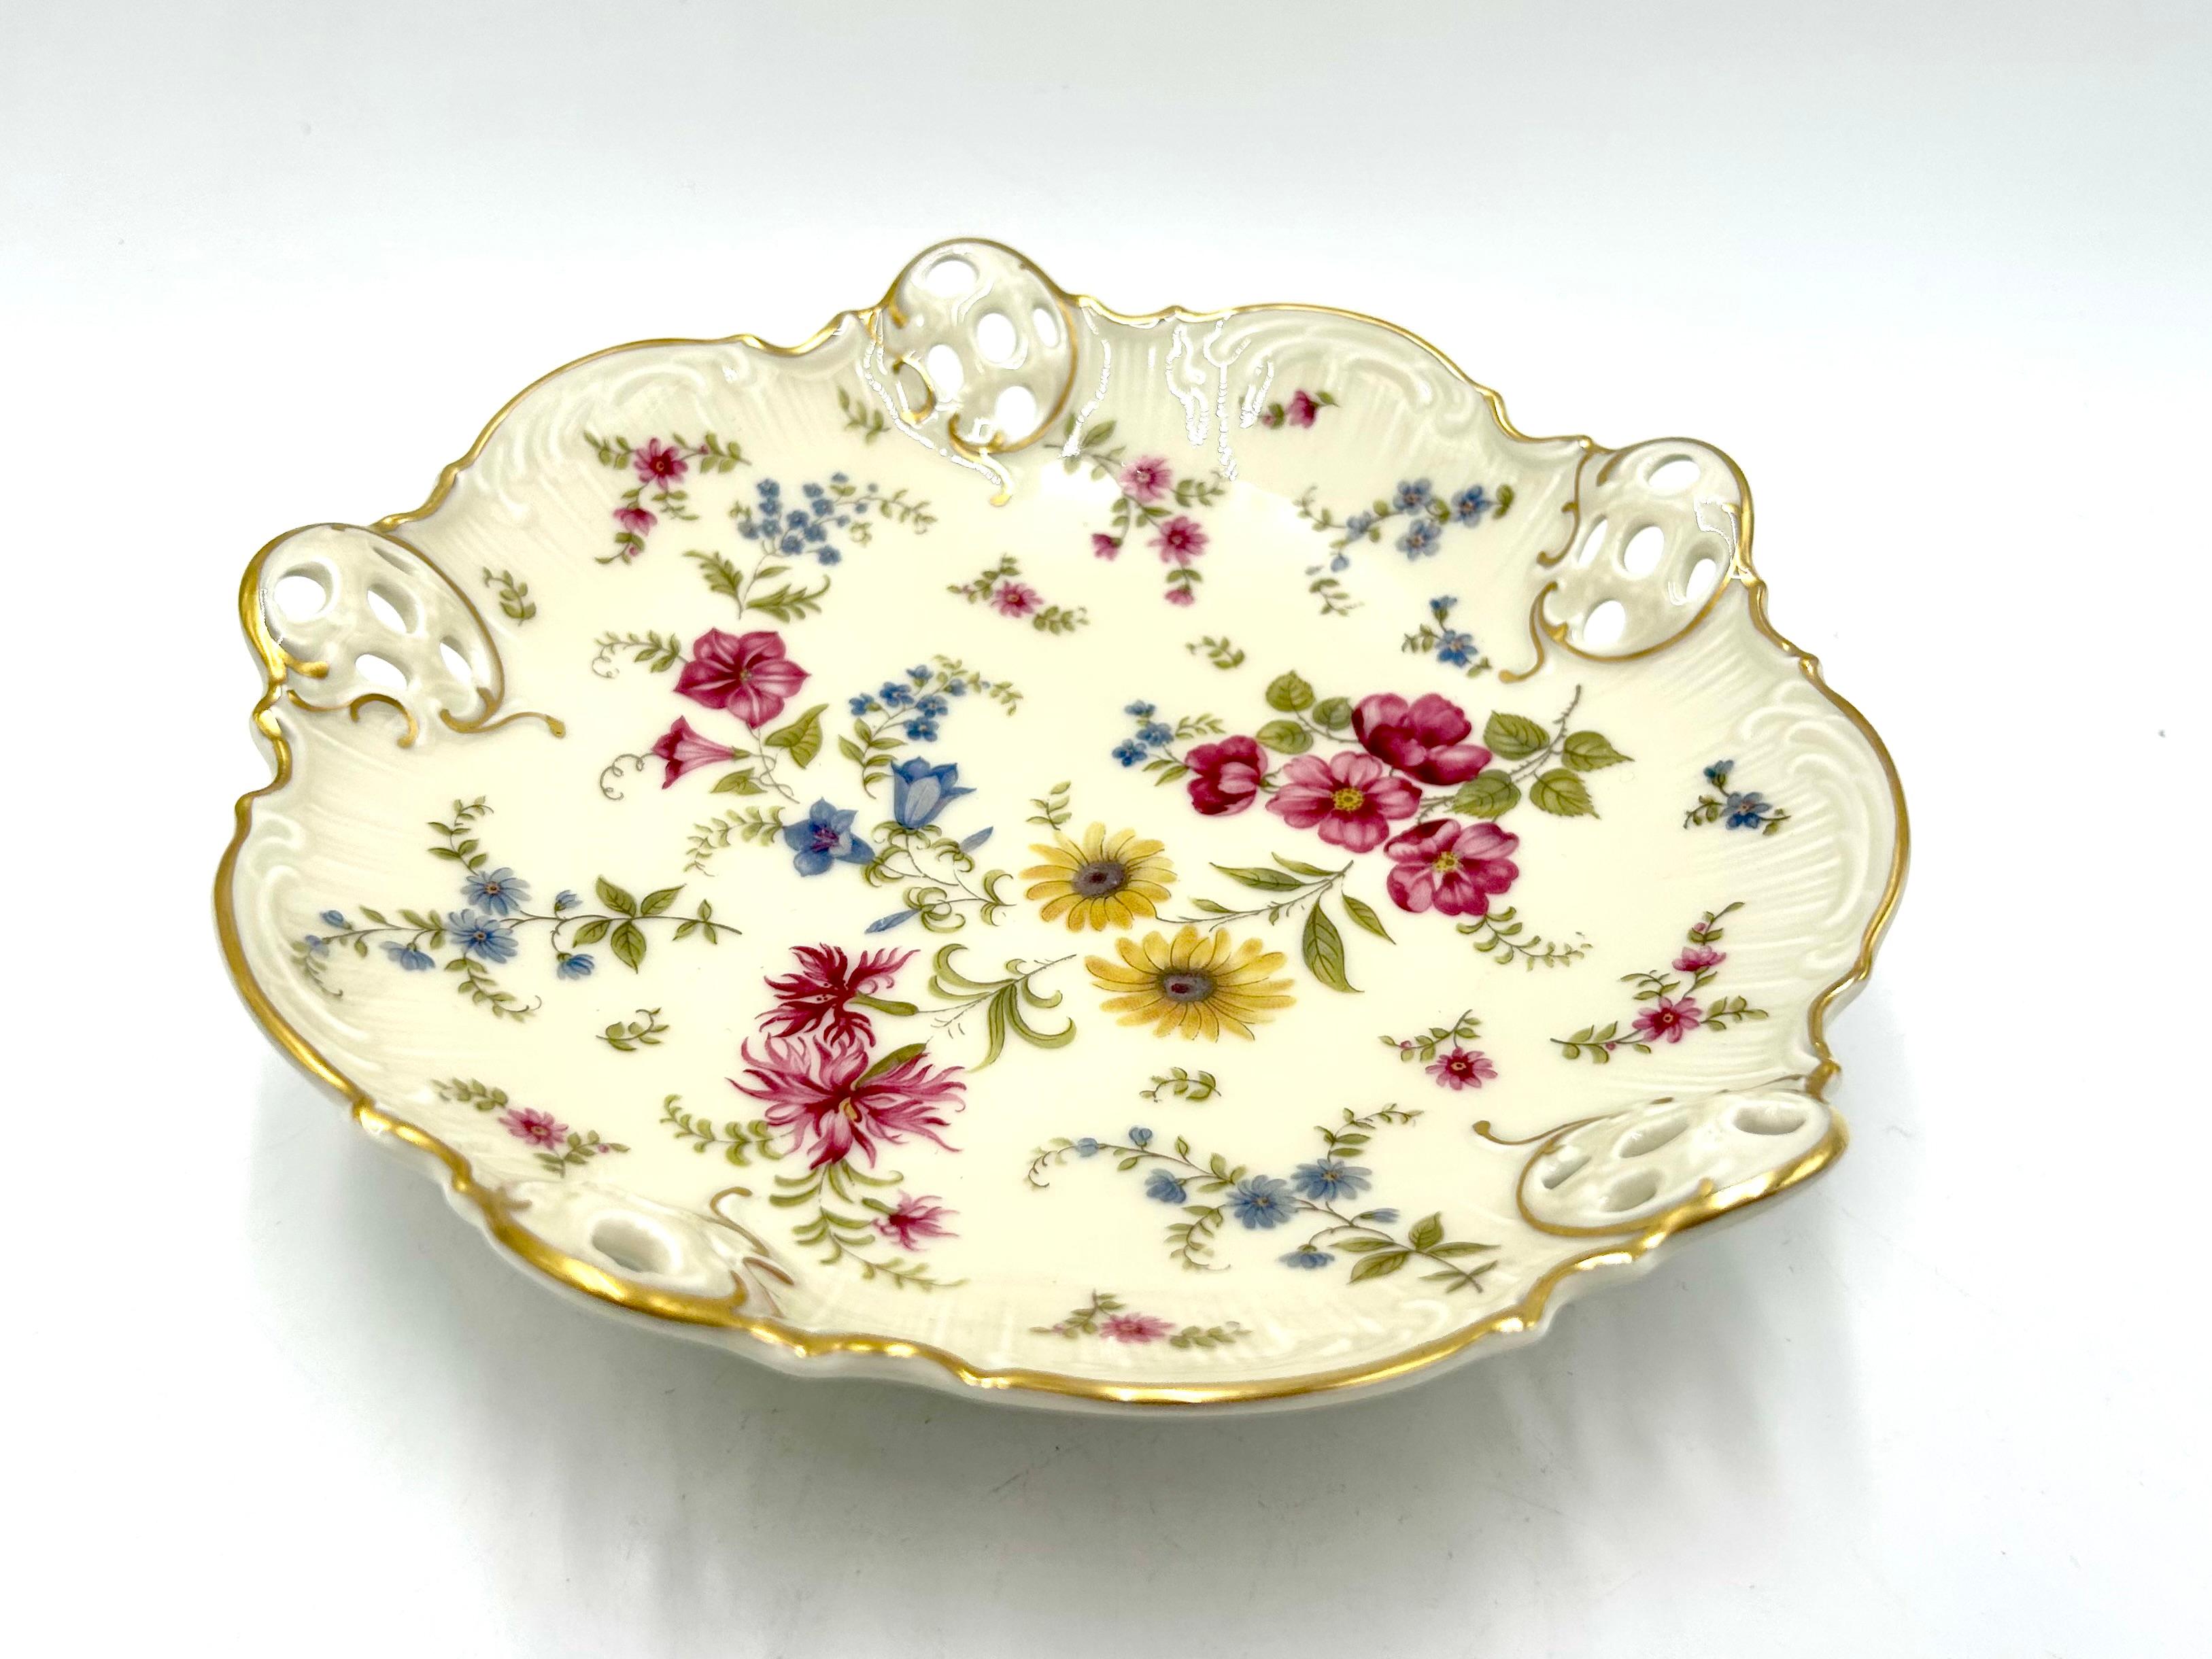 Openwork plate supported on three filigree legs from the Moliere collection, the renowned German Rosenthal label. The product is marked with the mark used in the years 1938-1952. Ecru porcelain decorated with openwork sides, floral meadow motif and